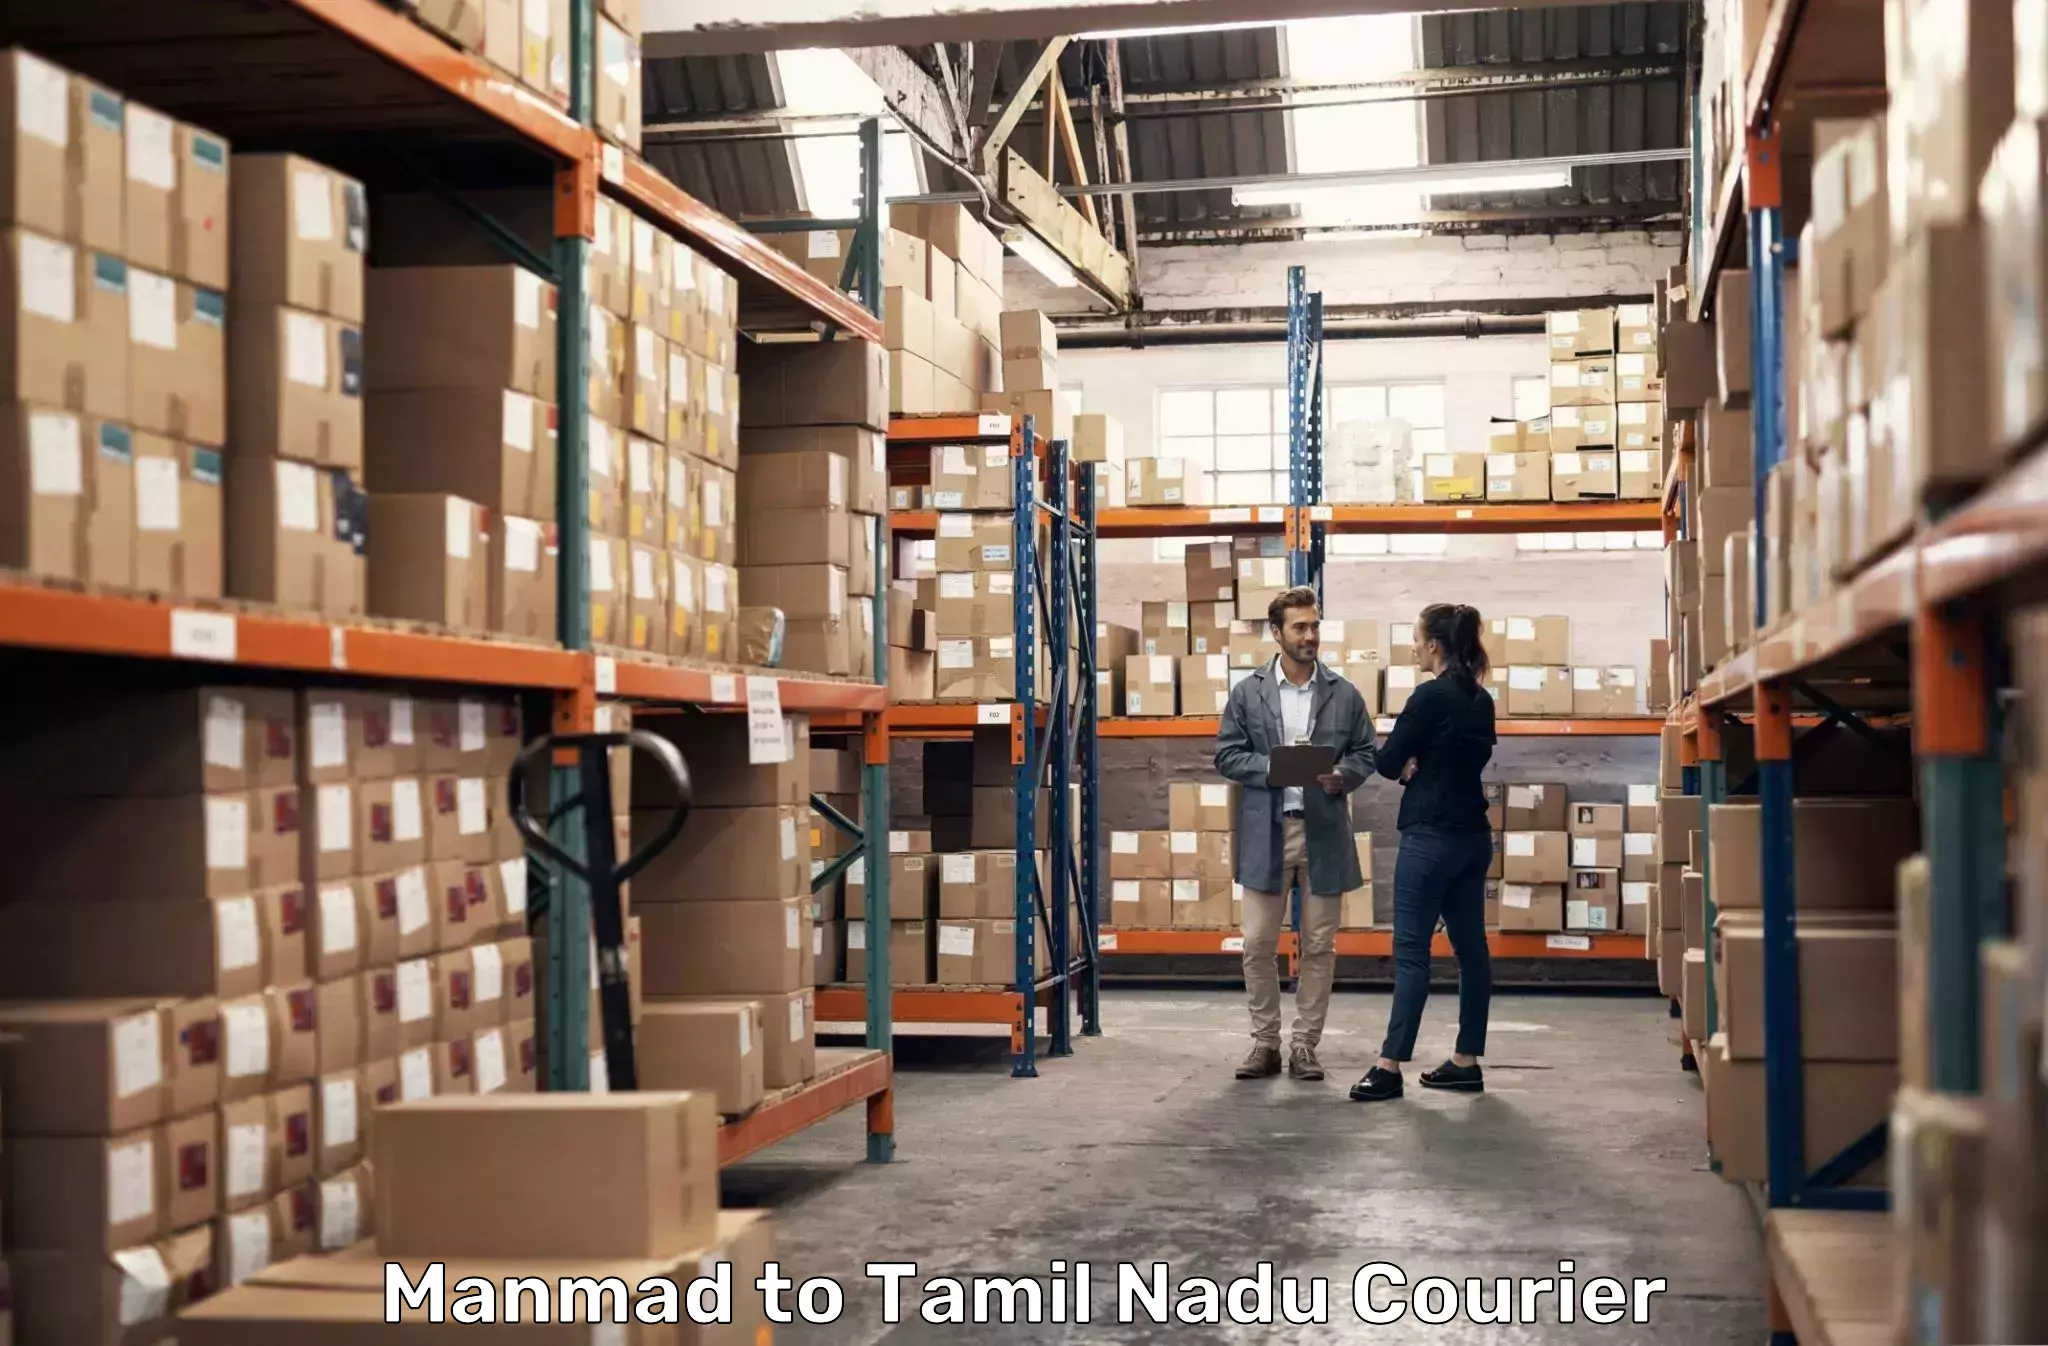 Express delivery network Manmad to Srirangam